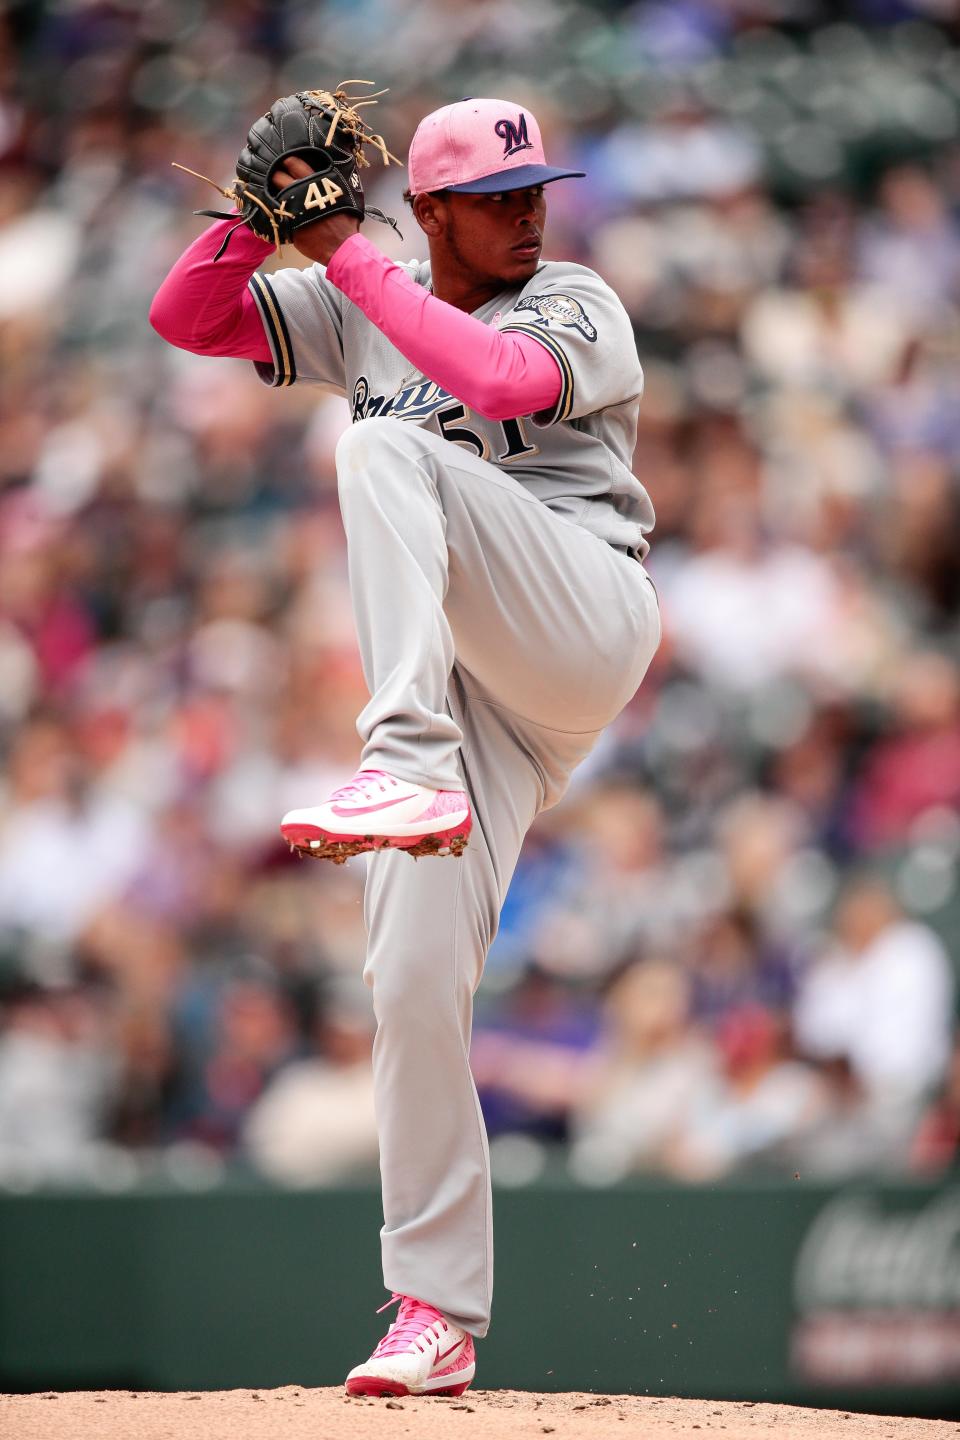 Rookie Freddy Peralta had an impressive major-league debut for the Brewers on Mother's Day. He had 13 strikeouts and allowed just one hit and two walks in 5 2/3 innings.